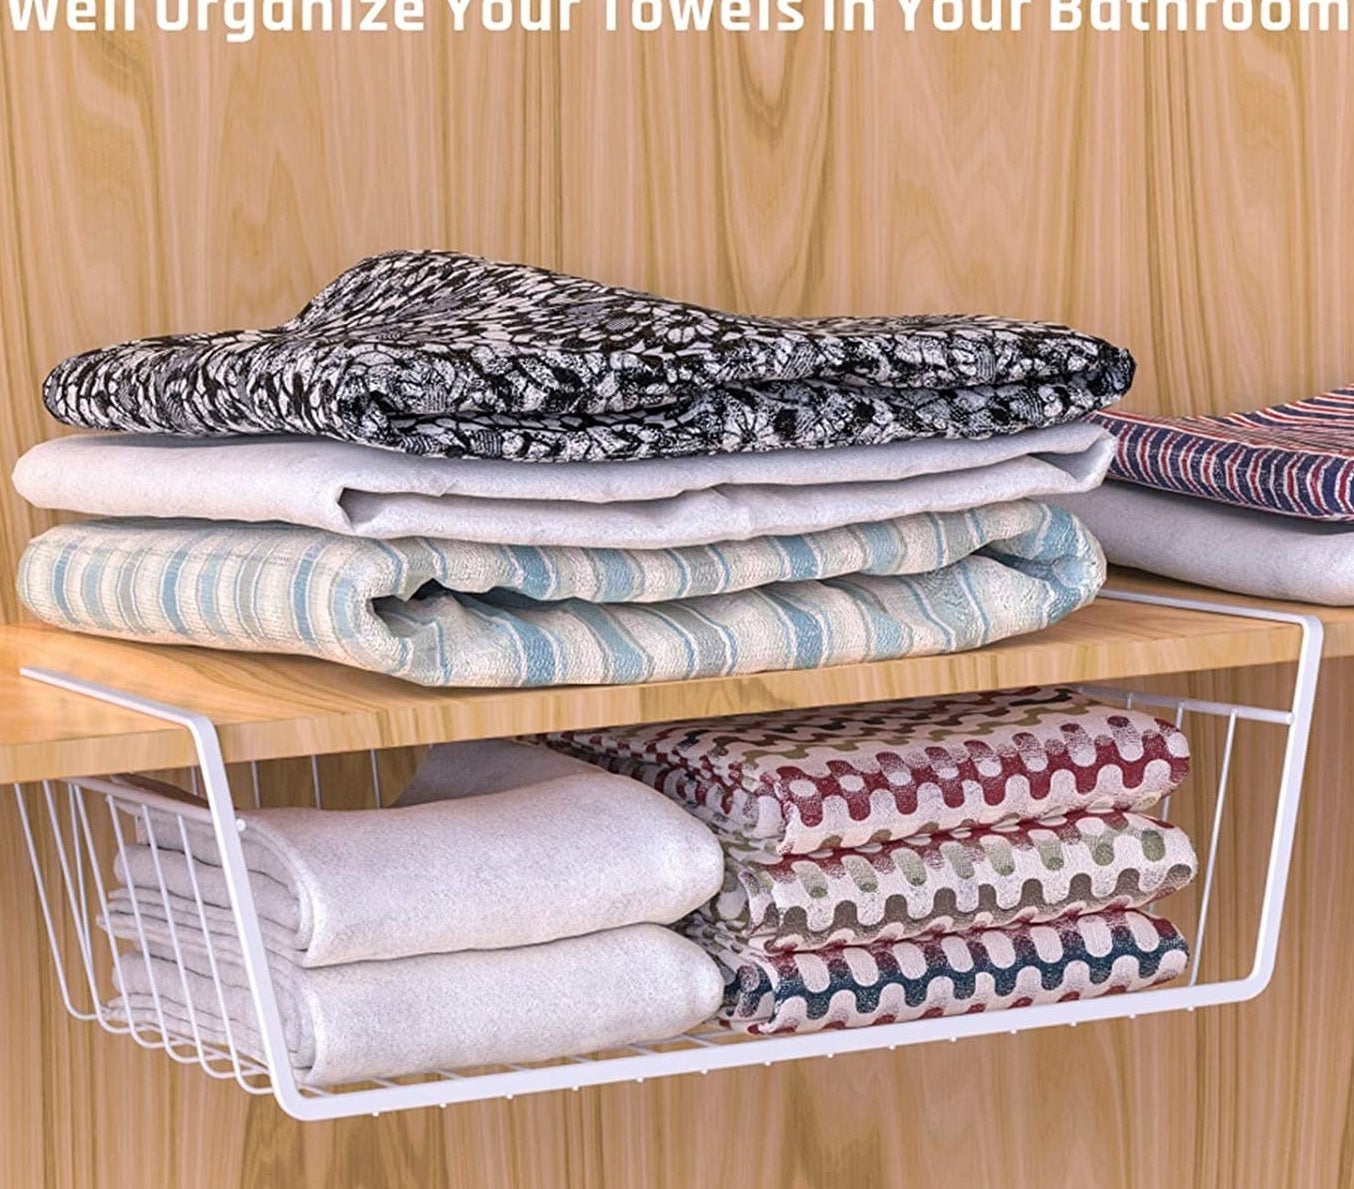 The basket on a shelf with towels in them